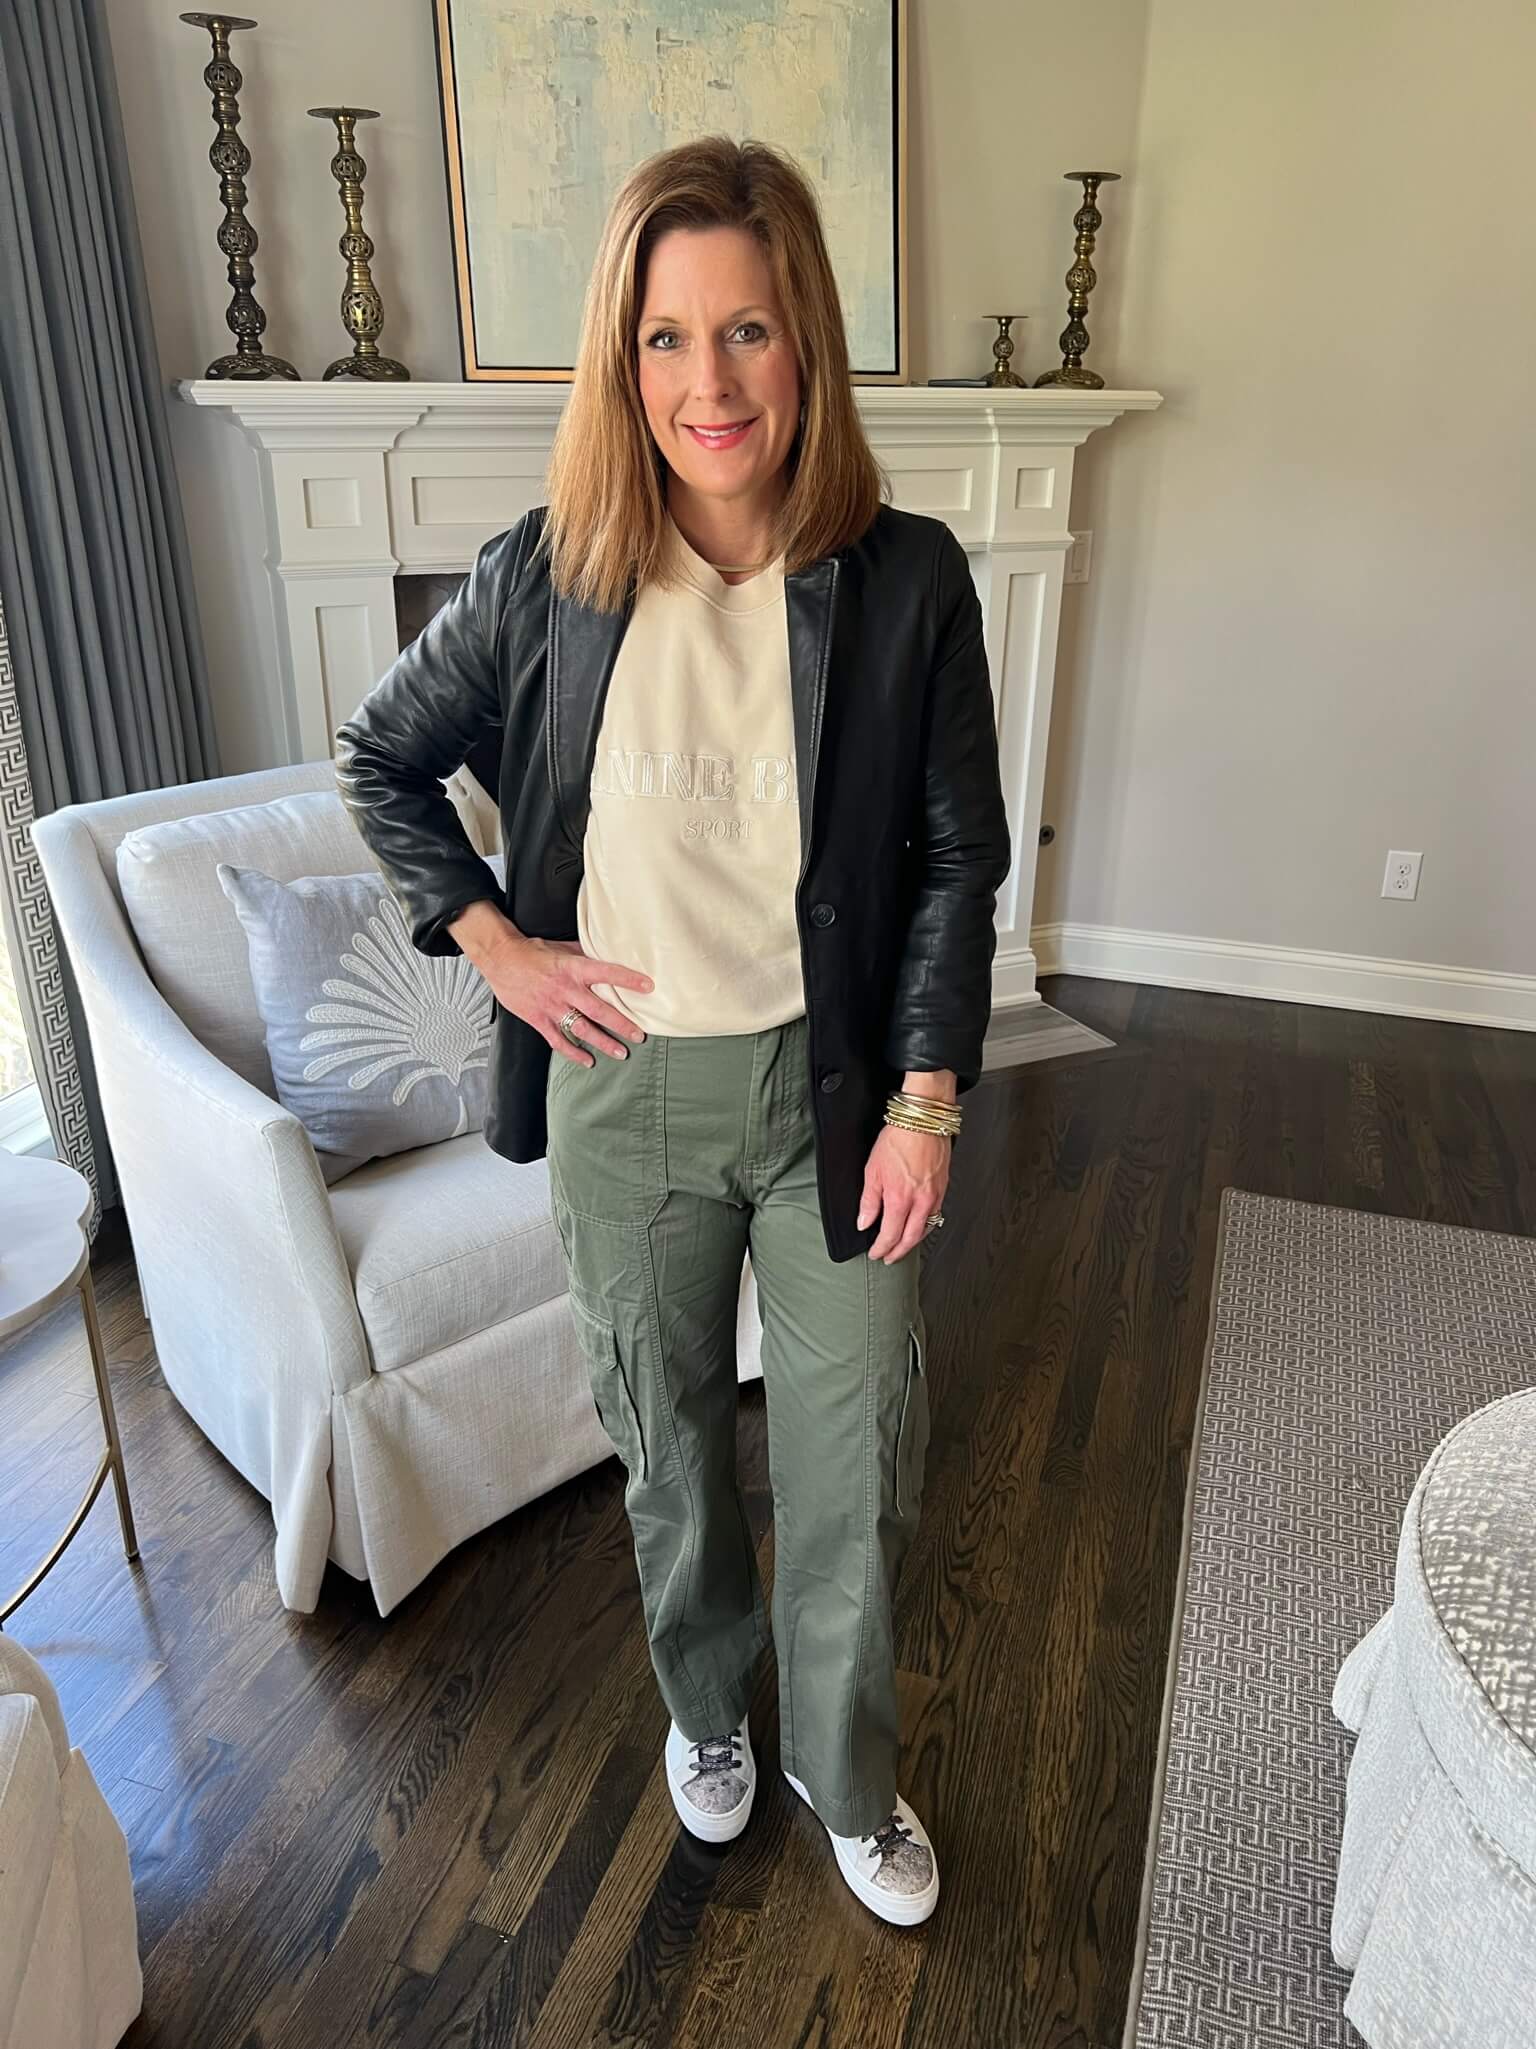 3 Ways To Style Cargo Pants Leather Blazer And Sweatshirt And Cargo Pants how to style a sweatshirt with leather blazer how to layer a sweatshirt under a leather blazer